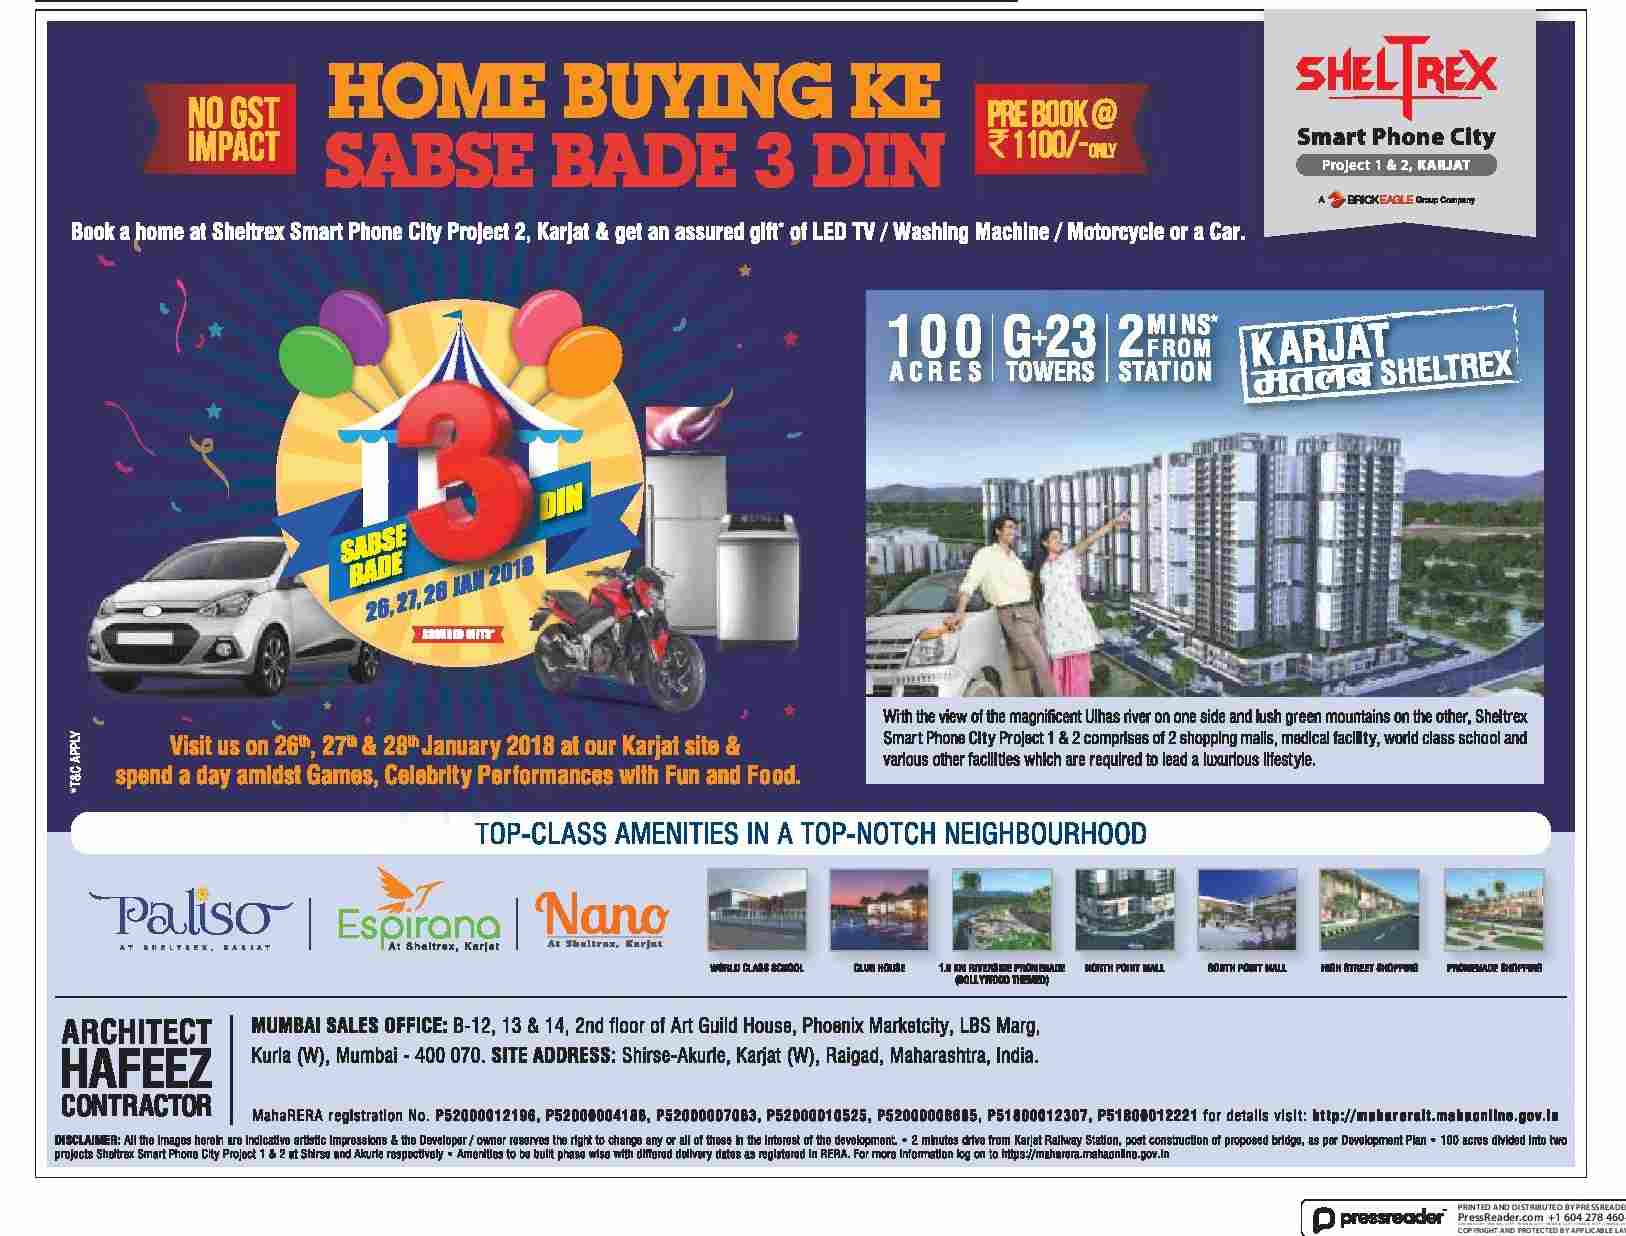 Book a home at Sheltrex Smart Phone City Project 2 & get assured gift